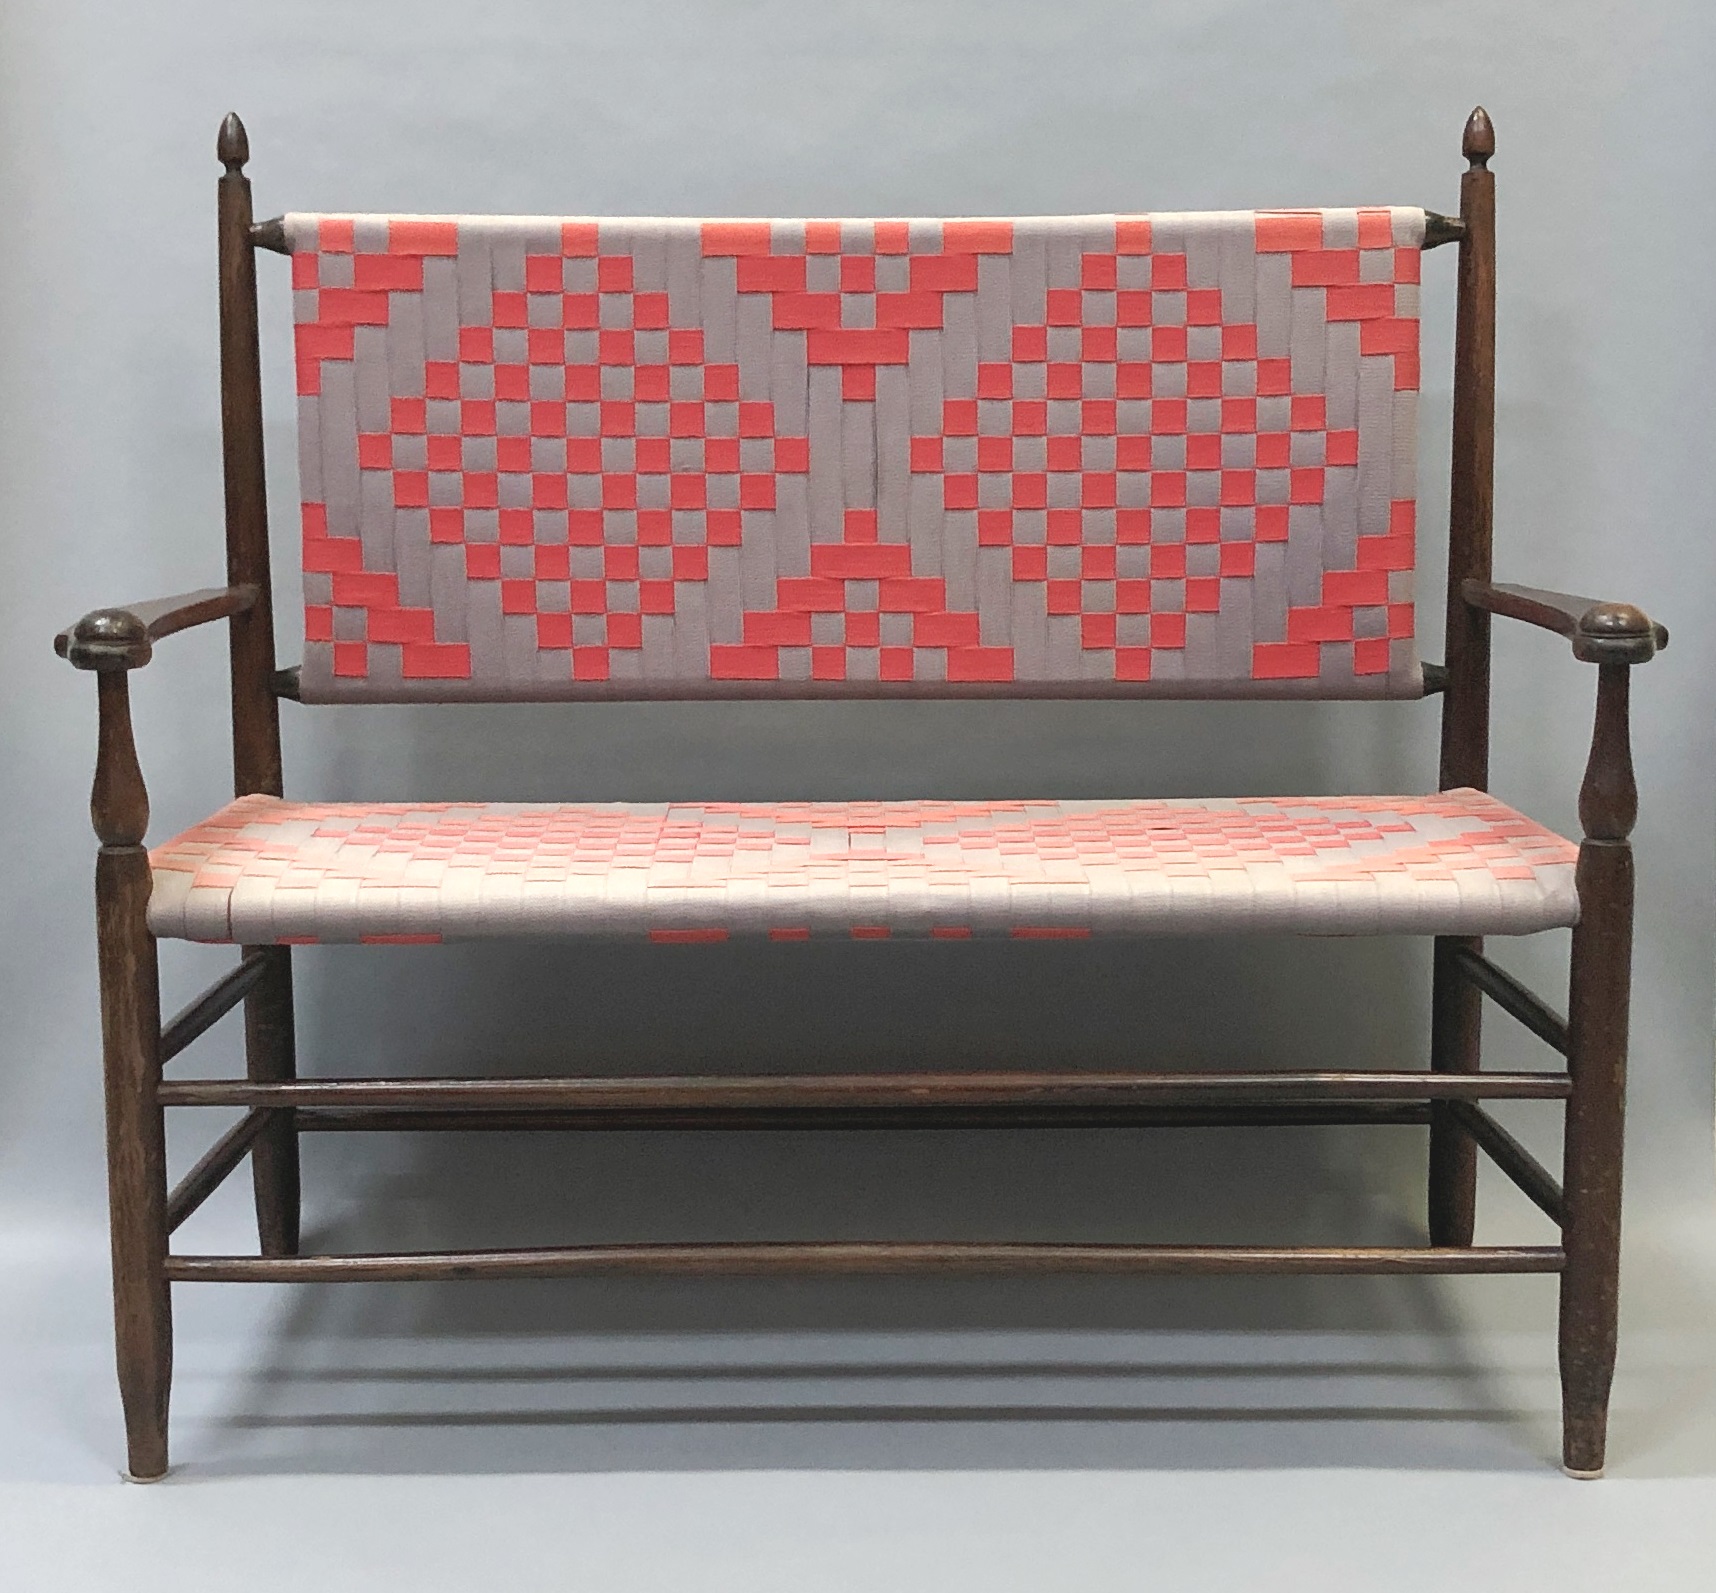 A bench with a pink and gray patterned seat.